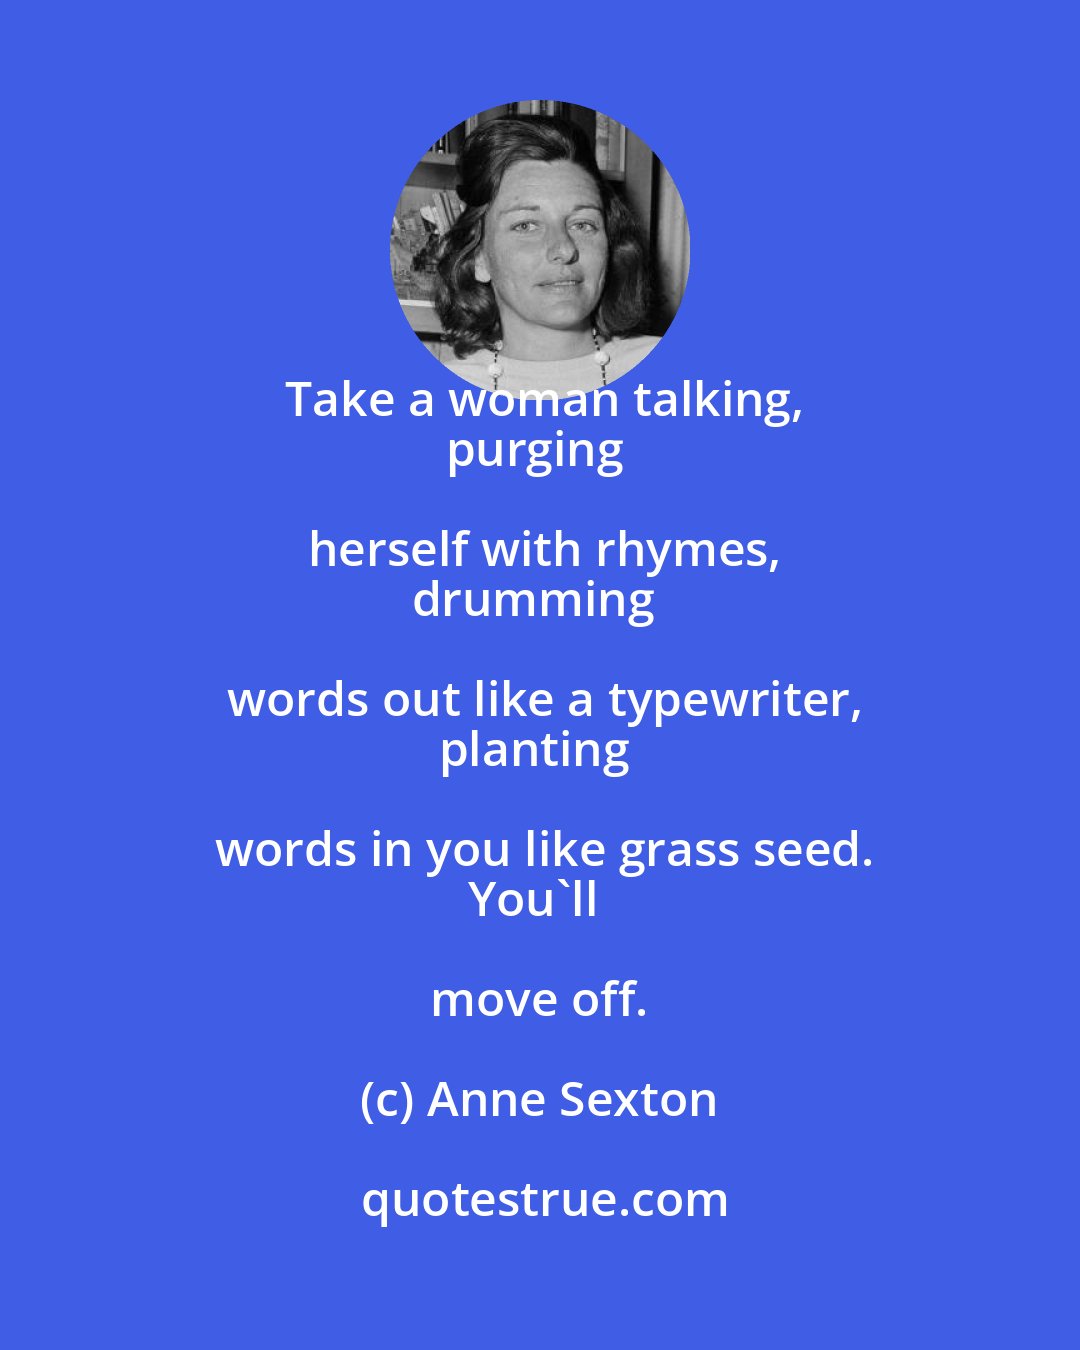 Anne Sexton: Take a woman talking,
purging herself with rhymes,
drumming words out like a typewriter,
planting words in you like grass seed.
You'll move off.